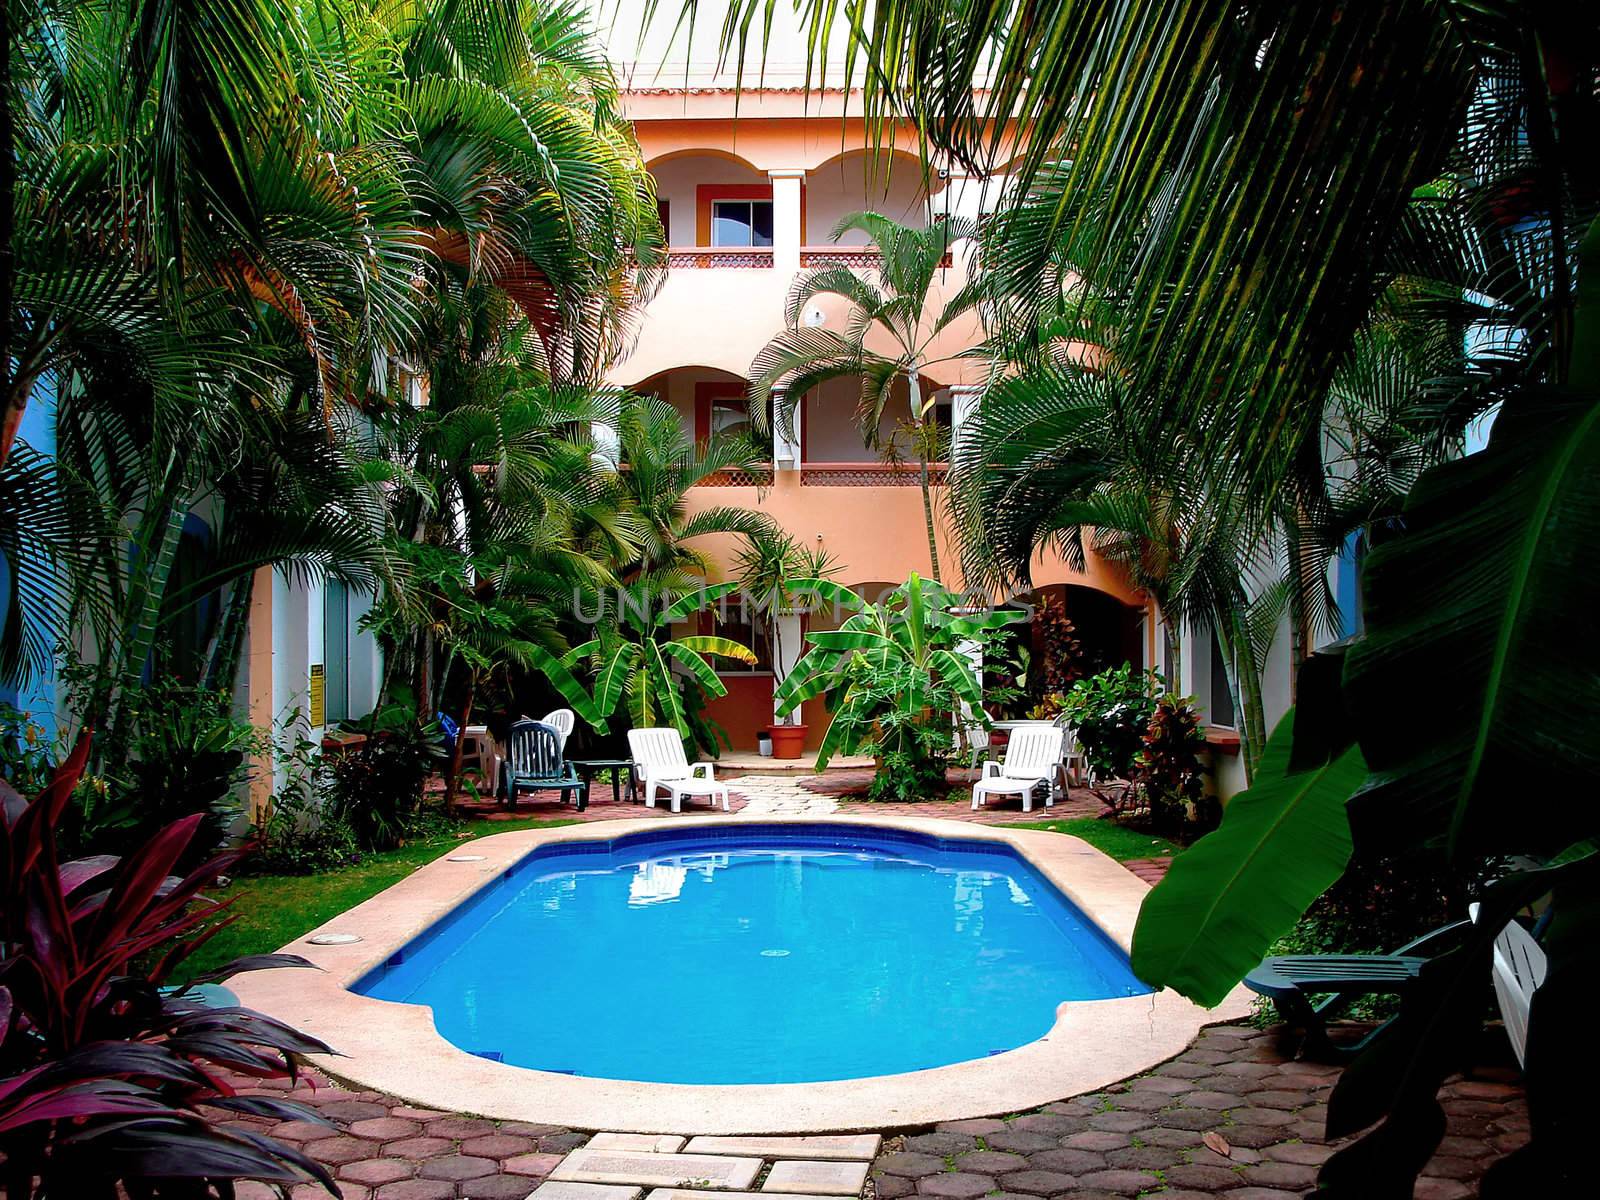 Courtyard of tropical condos with superb blue water pool, inviting destination.